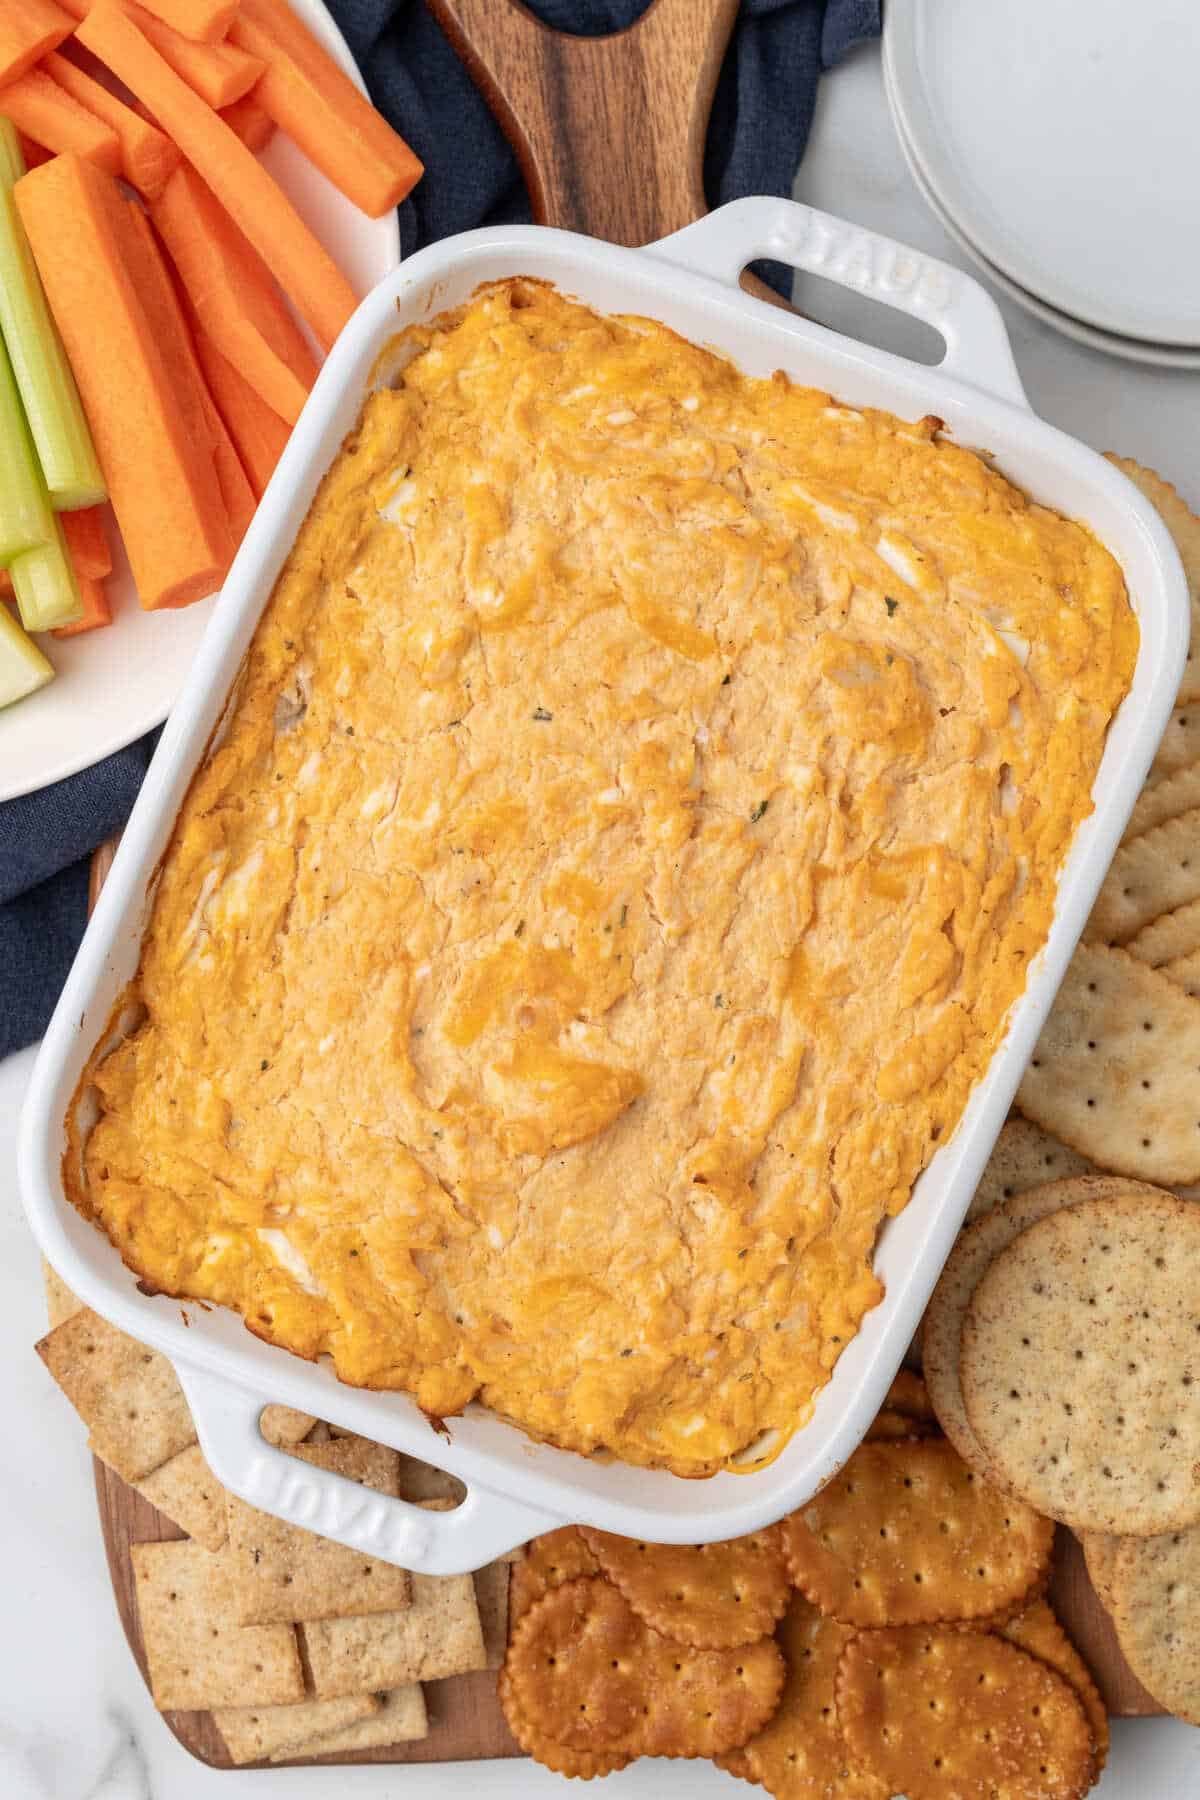 Creamy Buffalo Chicken Dip served with crackers and carrots.